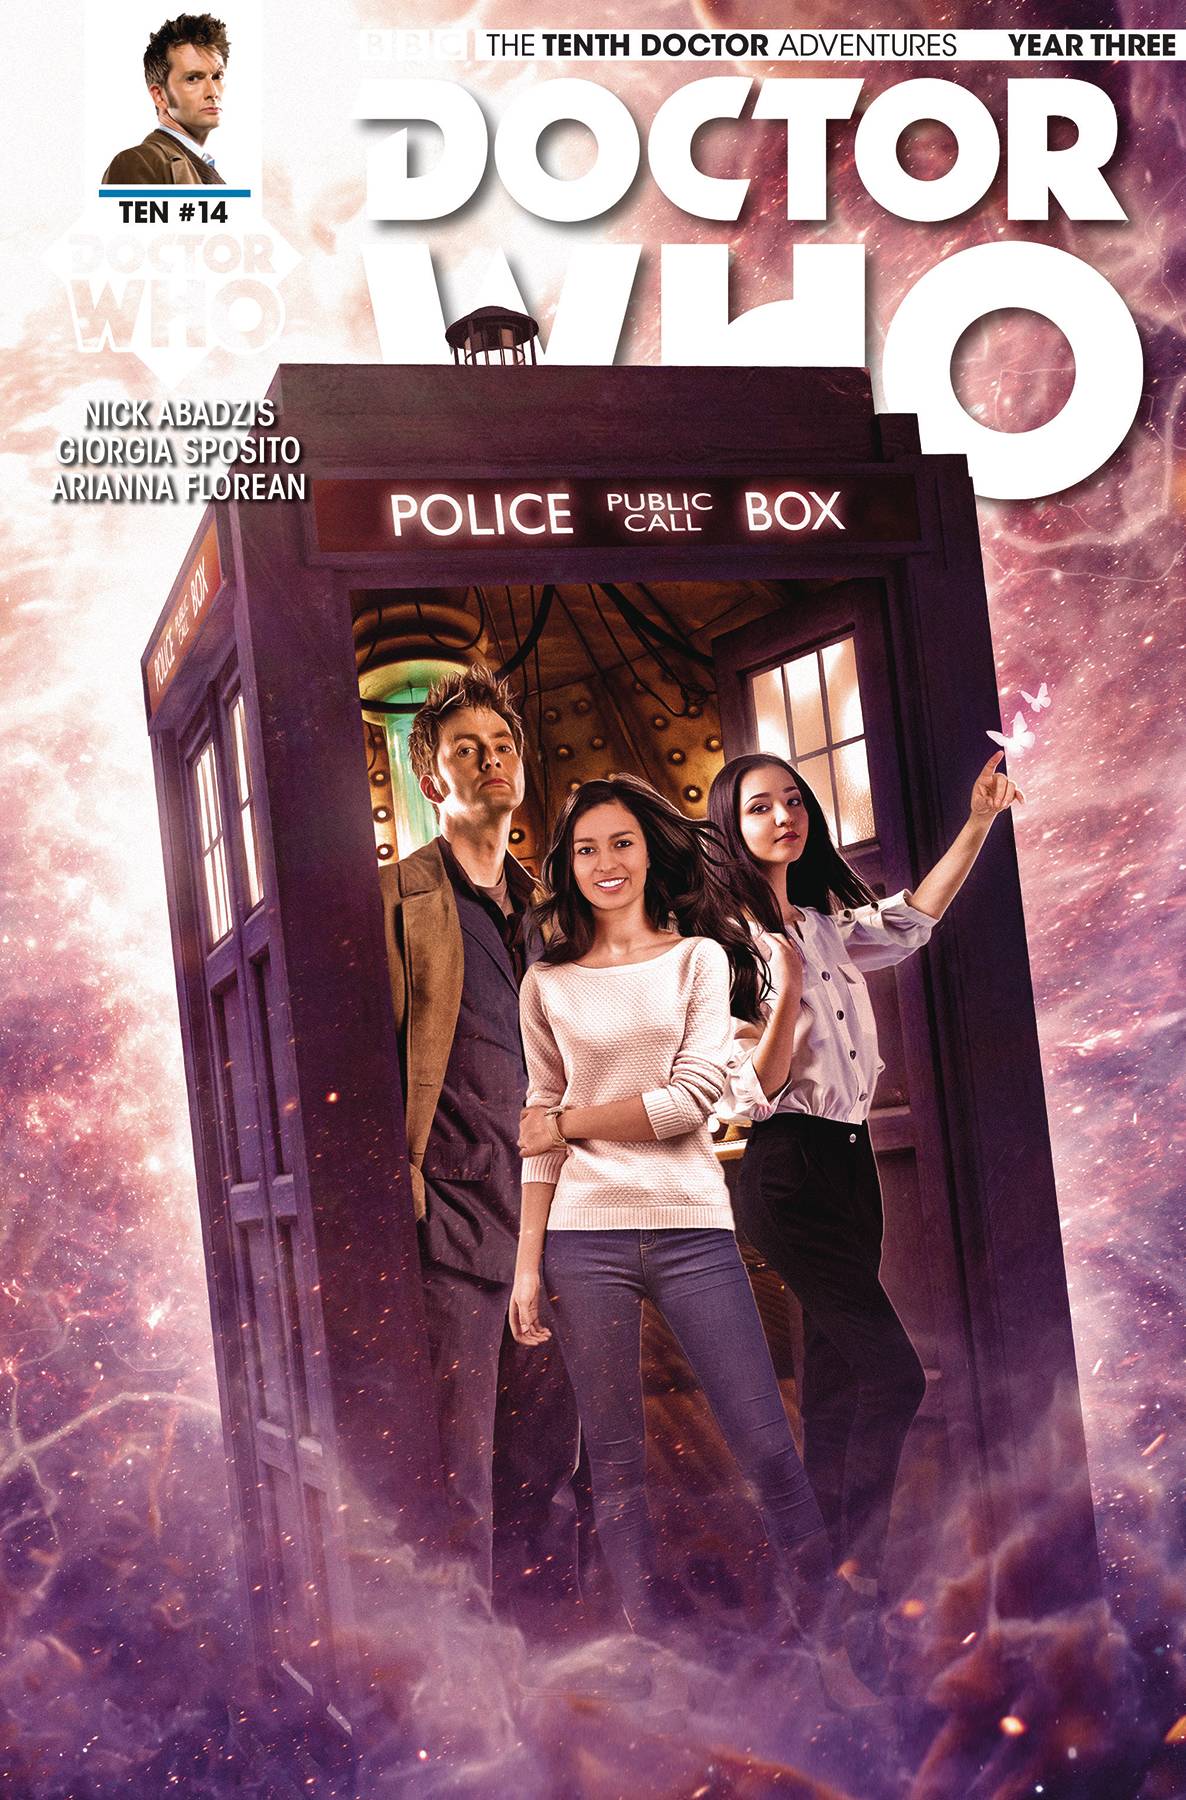 Doctor Who 10th Year Three #14 Cover B Photo